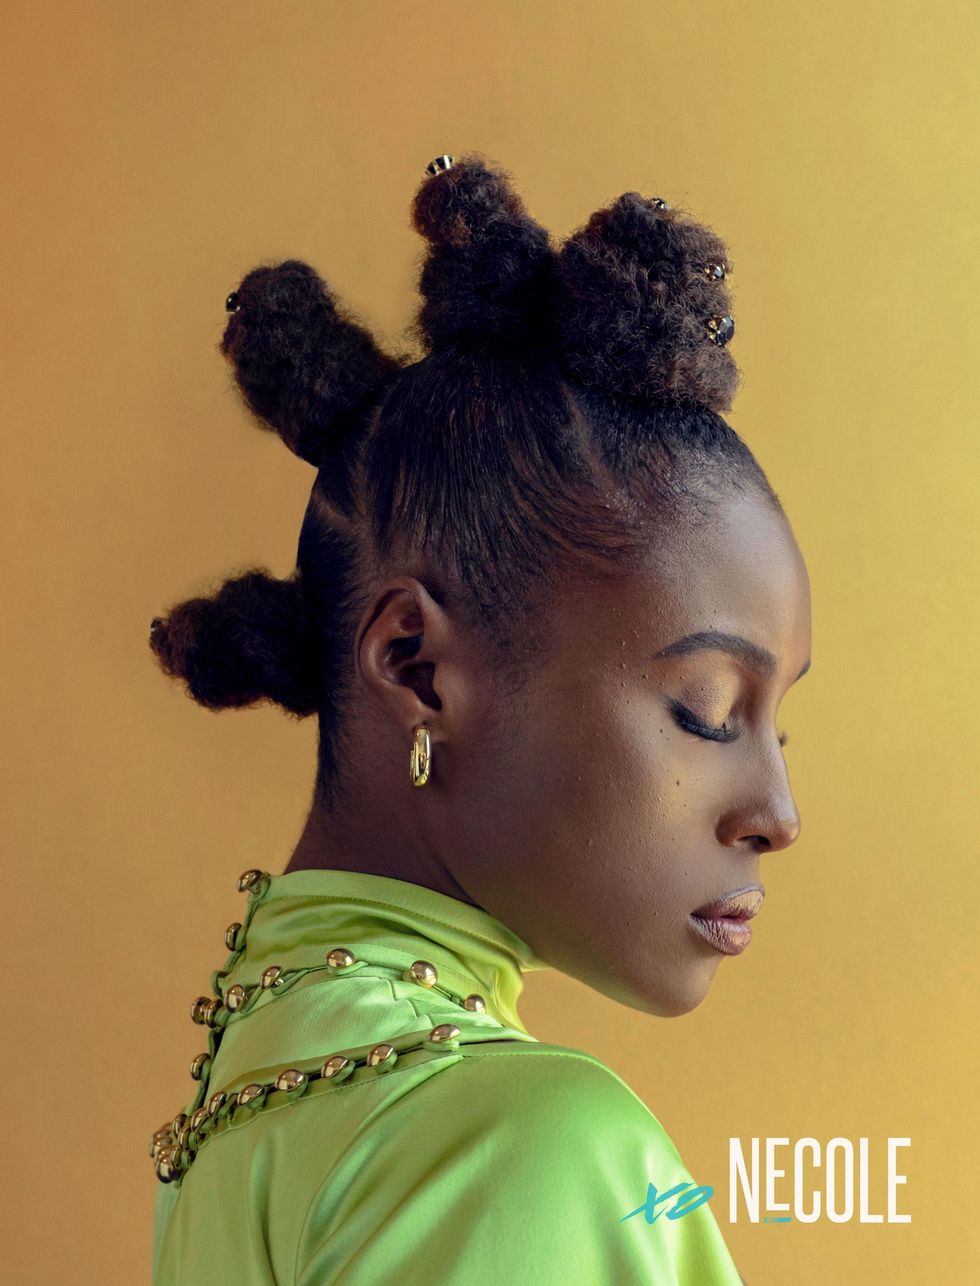 A Black woman, Issa Rae, has her hair in four Bantu knots in a mohawk style down her head. She looks down, eyes closed. Her lime green gown with gold embellishments covers her neck and shoulders. Her hoop earring are gold.